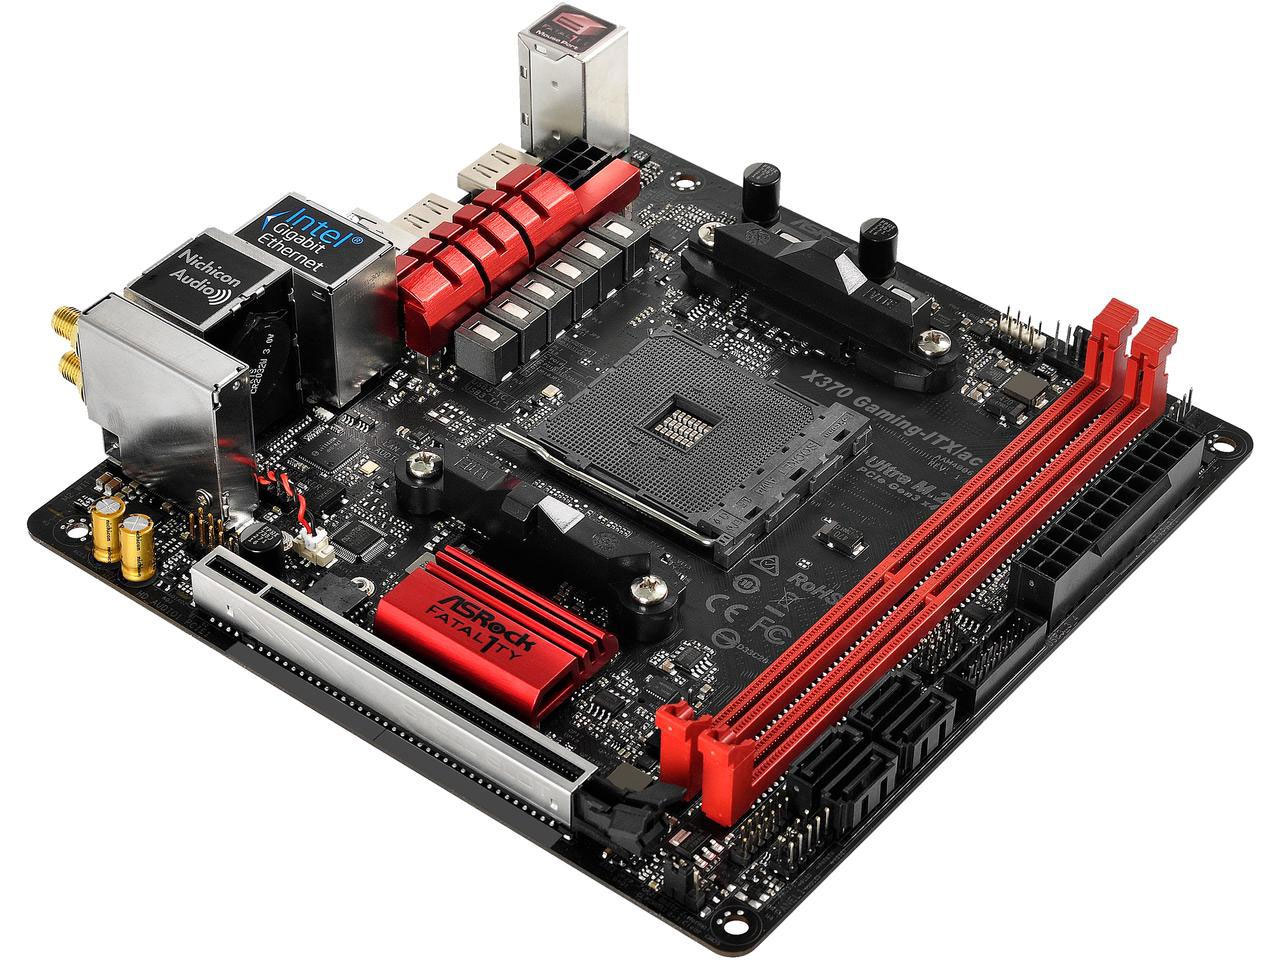 Image result for This mini-ITX gaming motherboard from ASRock is $120 after rebate